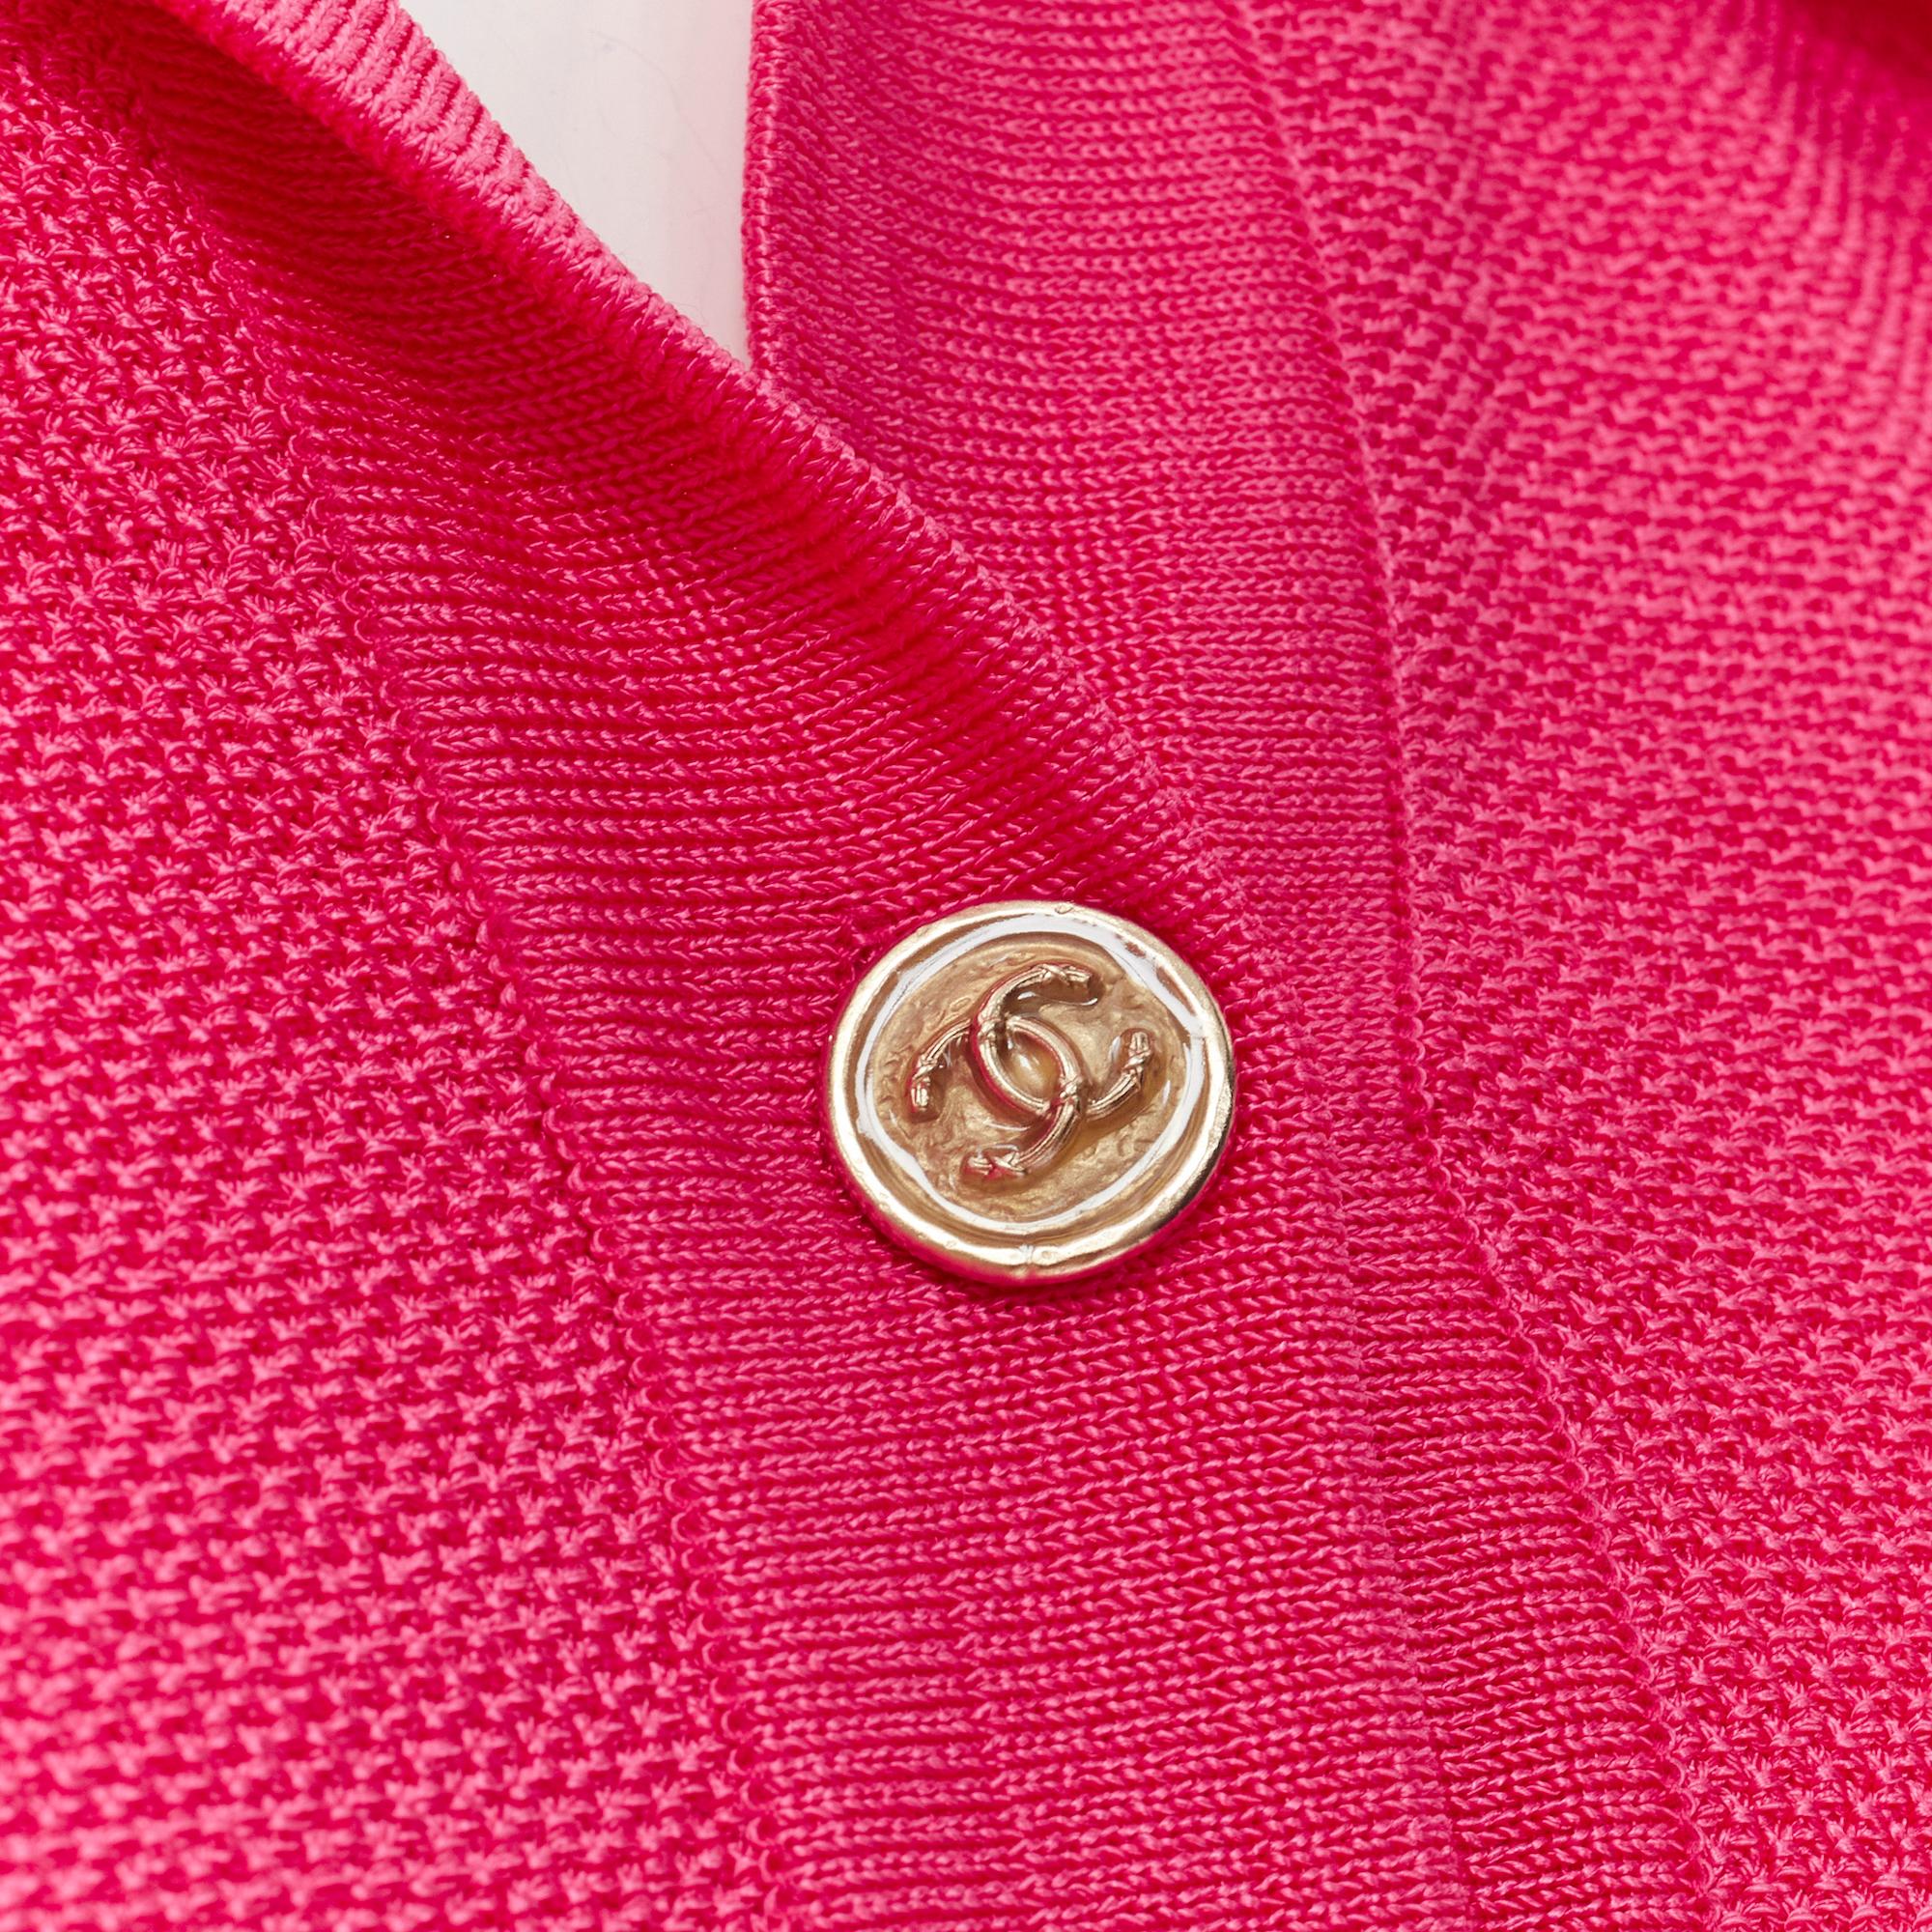 new CHANEL pink viscose knit gold CC button embroidery anglais polo dress FR38 M
Brand: Chanel
Designer: Virginie Viard
Material: Viscose
Color: Pink
Pattern: Solid
Closure: Button
Extra Detail: Polo Tunic Knit Dress. Gold-toned CC Logo button.